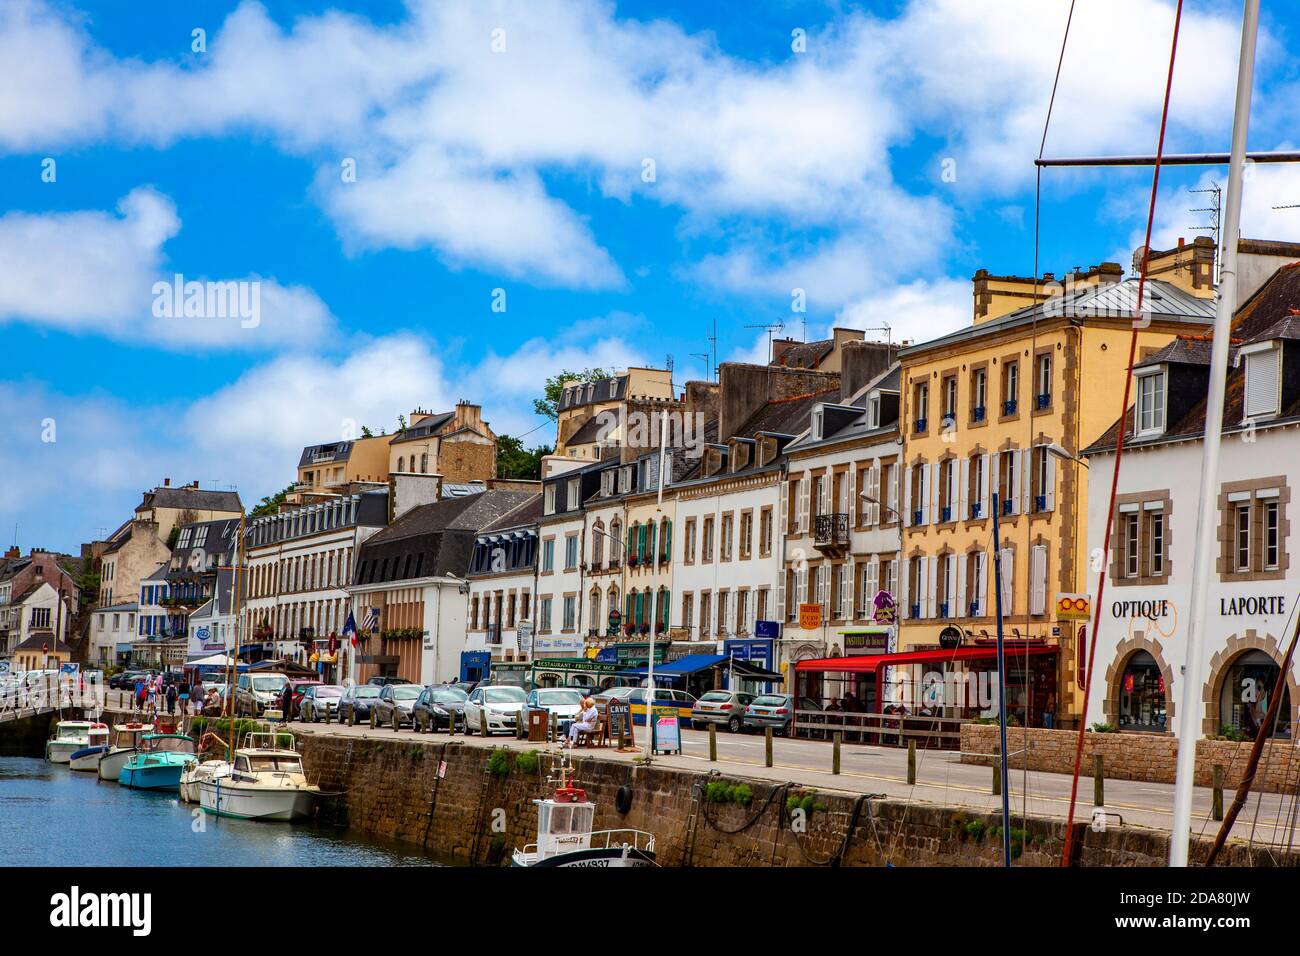 Audierne, Brittany, France Stock Photo